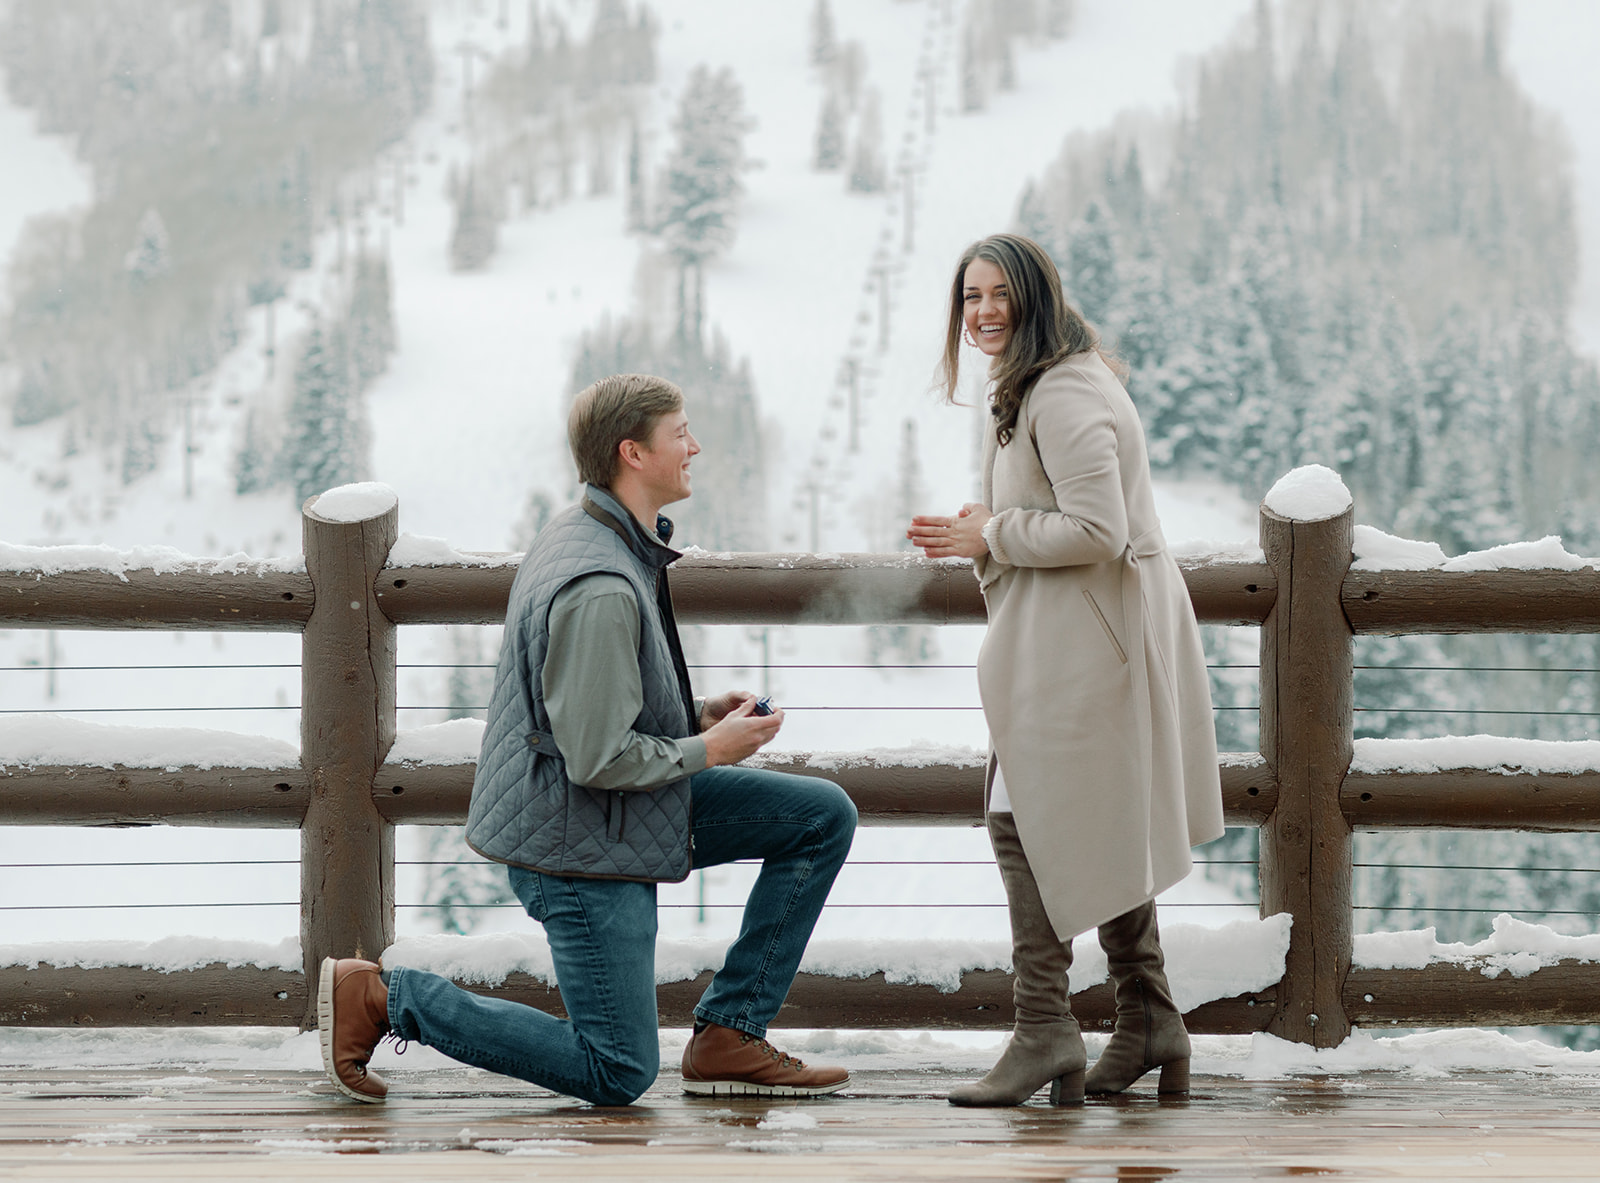  A white male down one knee getting with a ring in his hand. The male has dirty blonde hair and is looking up at his soon to be fiance. He is down on knee proposing to the brunette female. The female is wearing a tan peacoat and is looking up at the camera in complete surprise on her marriage proposal. The scenery in the background are beautiful snowy mountains. The deck they are on is called the "Flagstaff Mountain Deck" and is located at Stein Eriksen Lodge, Deer Valley. 